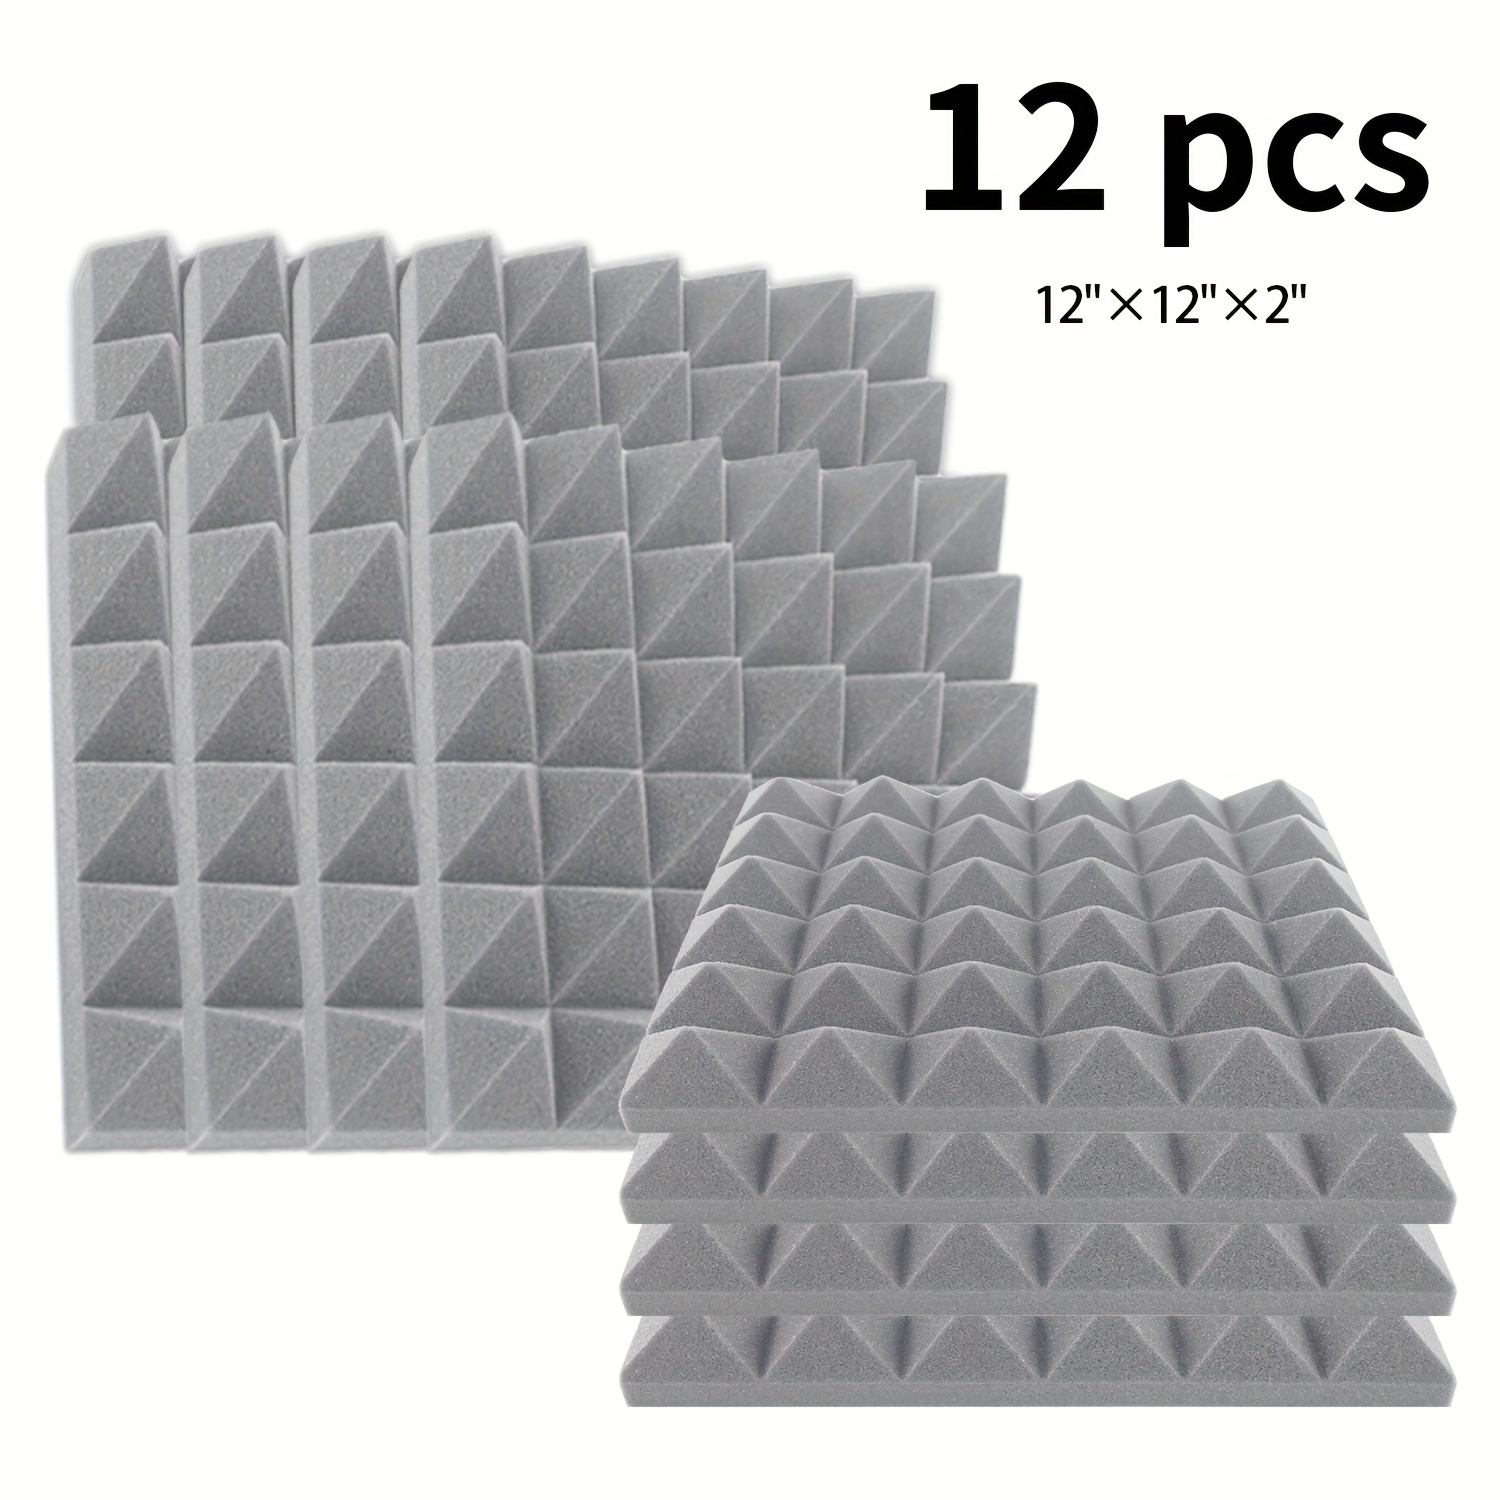 

12 Pcs Of Wall Soundproofing Panels, Acoustic Foam Absorption Wall Panels, 12"×12"×2" Acoustic Damping Wall Panels, Used For Reducing Noise In Bedrooms And Studios, Grey And Yellow Eid Al-adha Mubarak